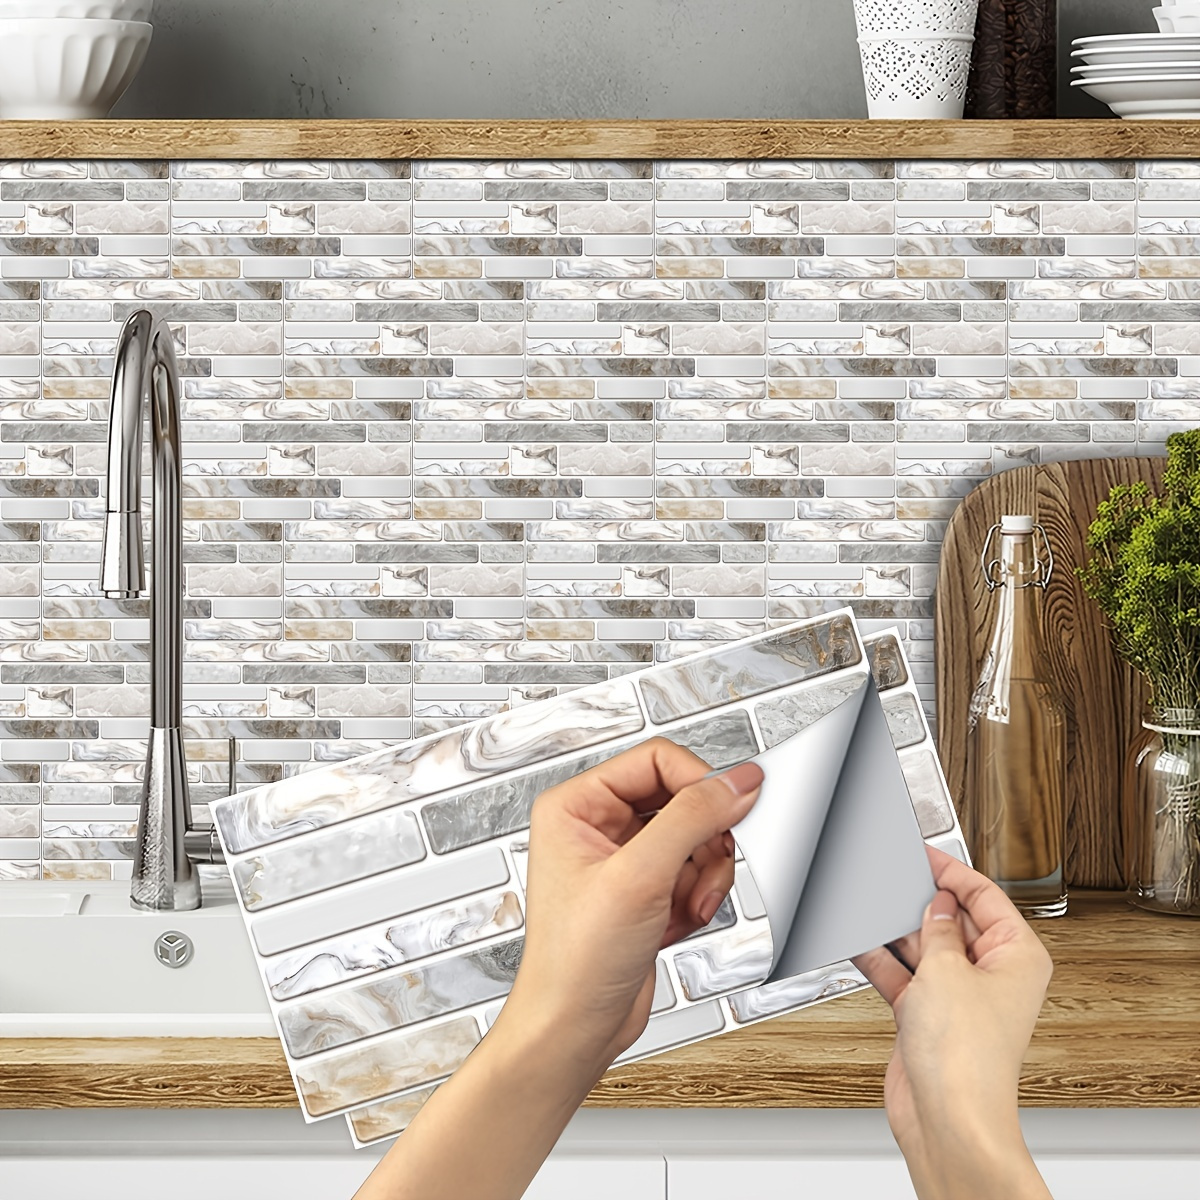 

5pcs Waterproof 3d Backsplash Kitchen Tile Stickers - Self-adhesive Peel And Stick Decorative Wall Decals For Diy Home Decor